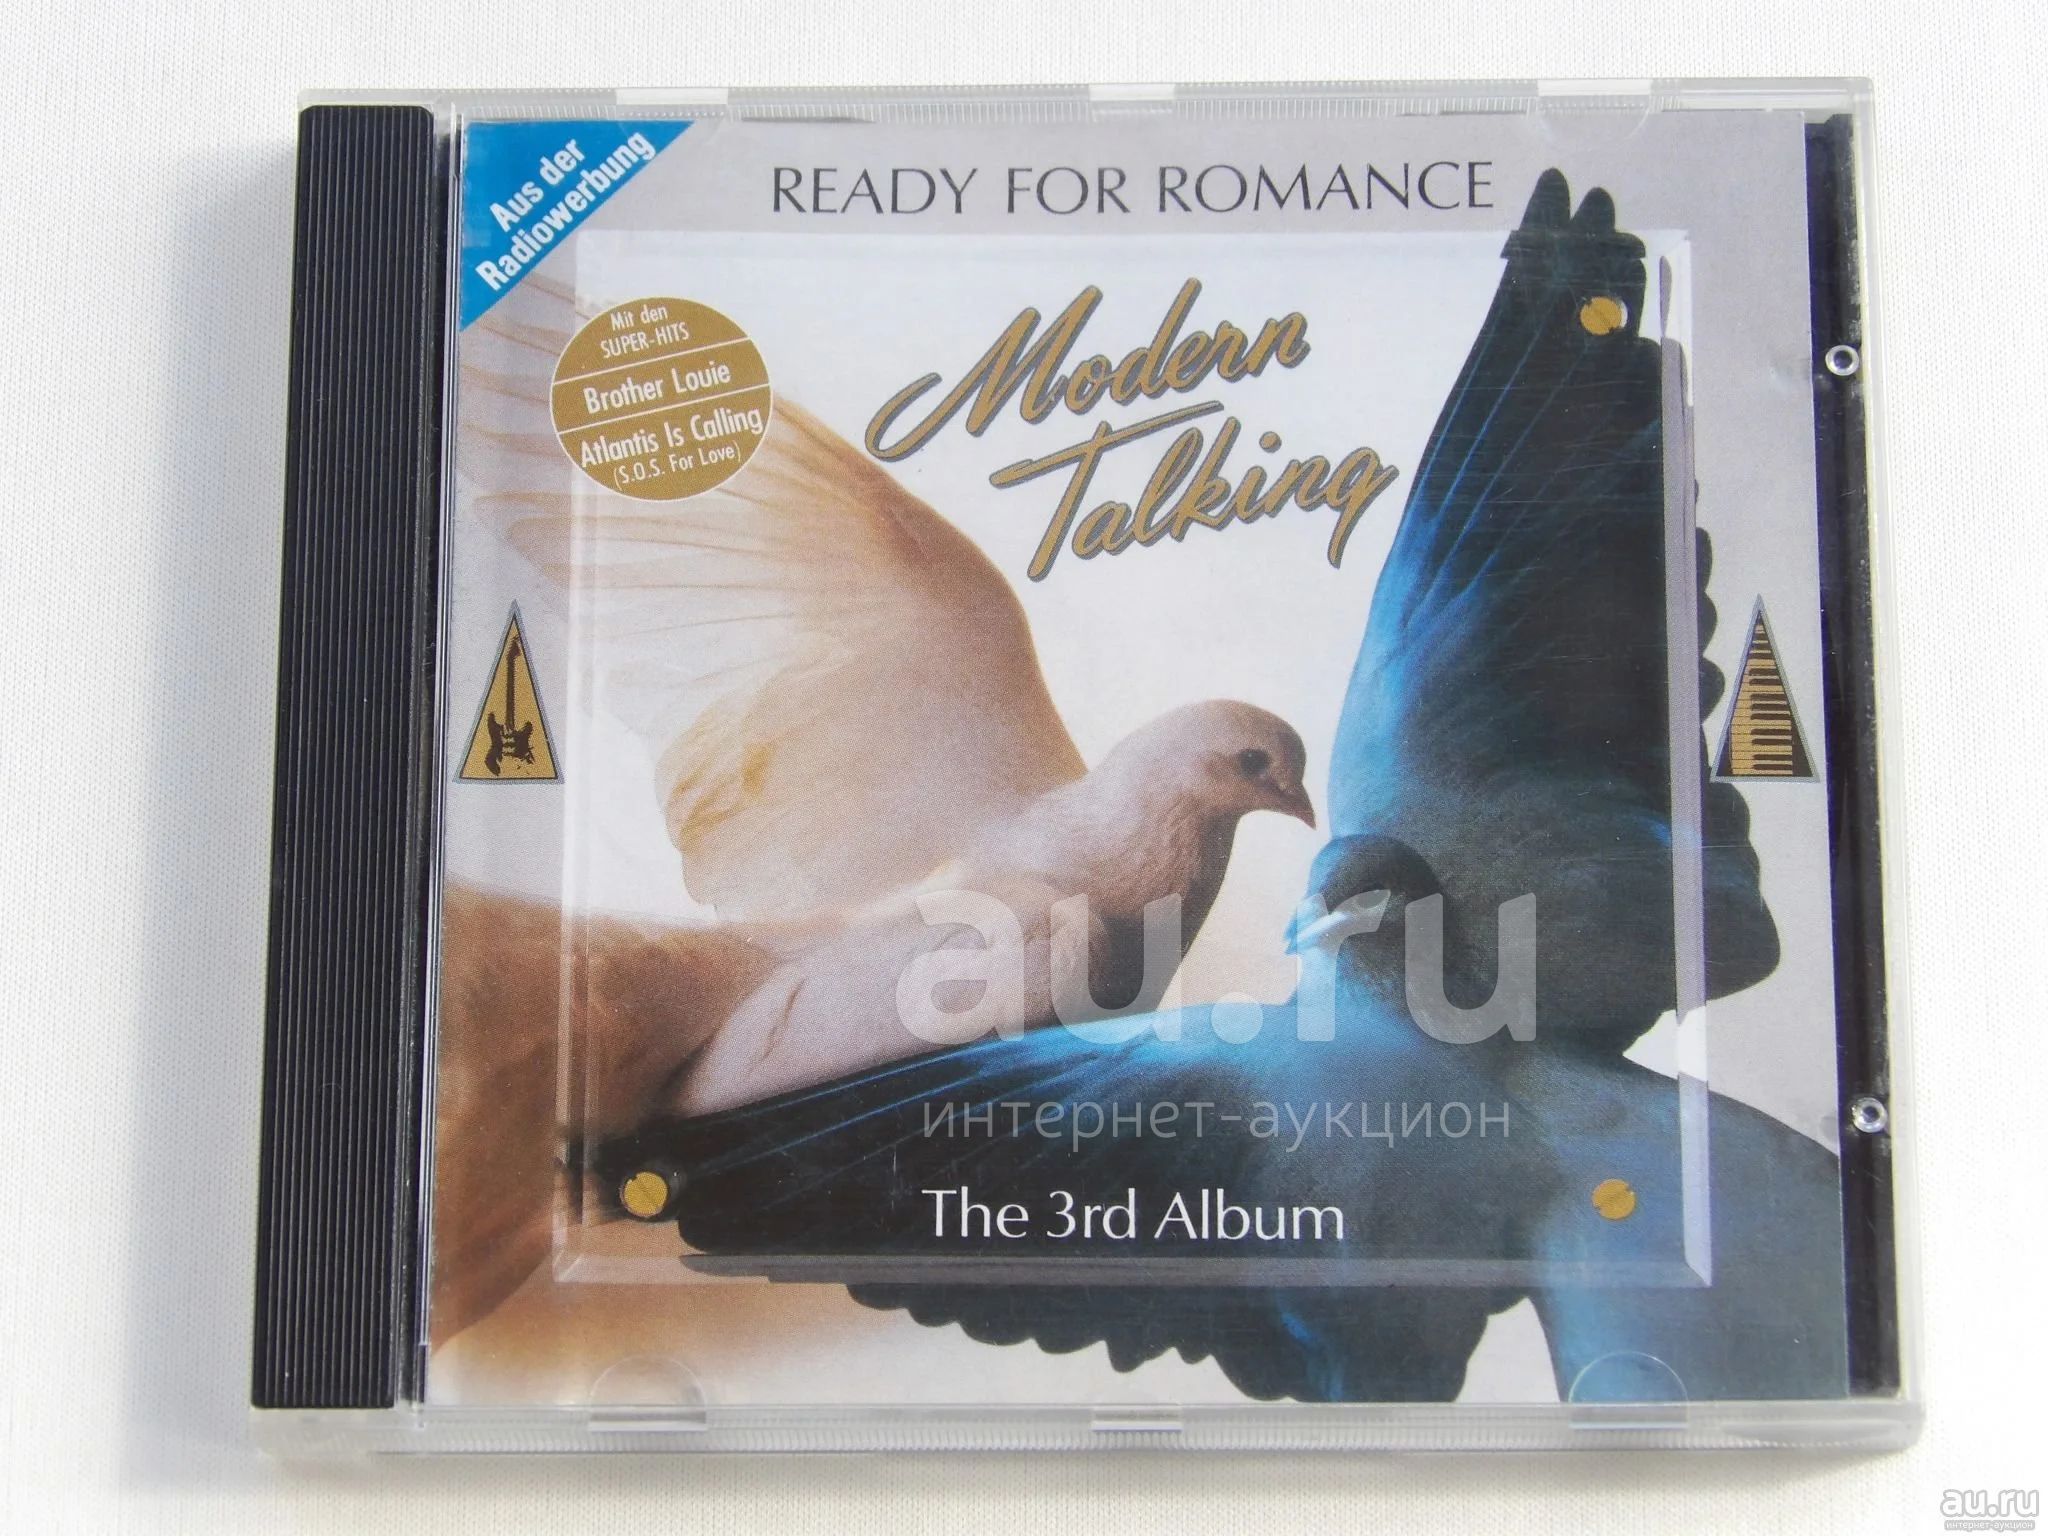 Modern talking ready for Romance 1986. Ready for Romance альбом. Modern talking ready for Romance. Ready for Romance - the 3rd album. Ready for romance